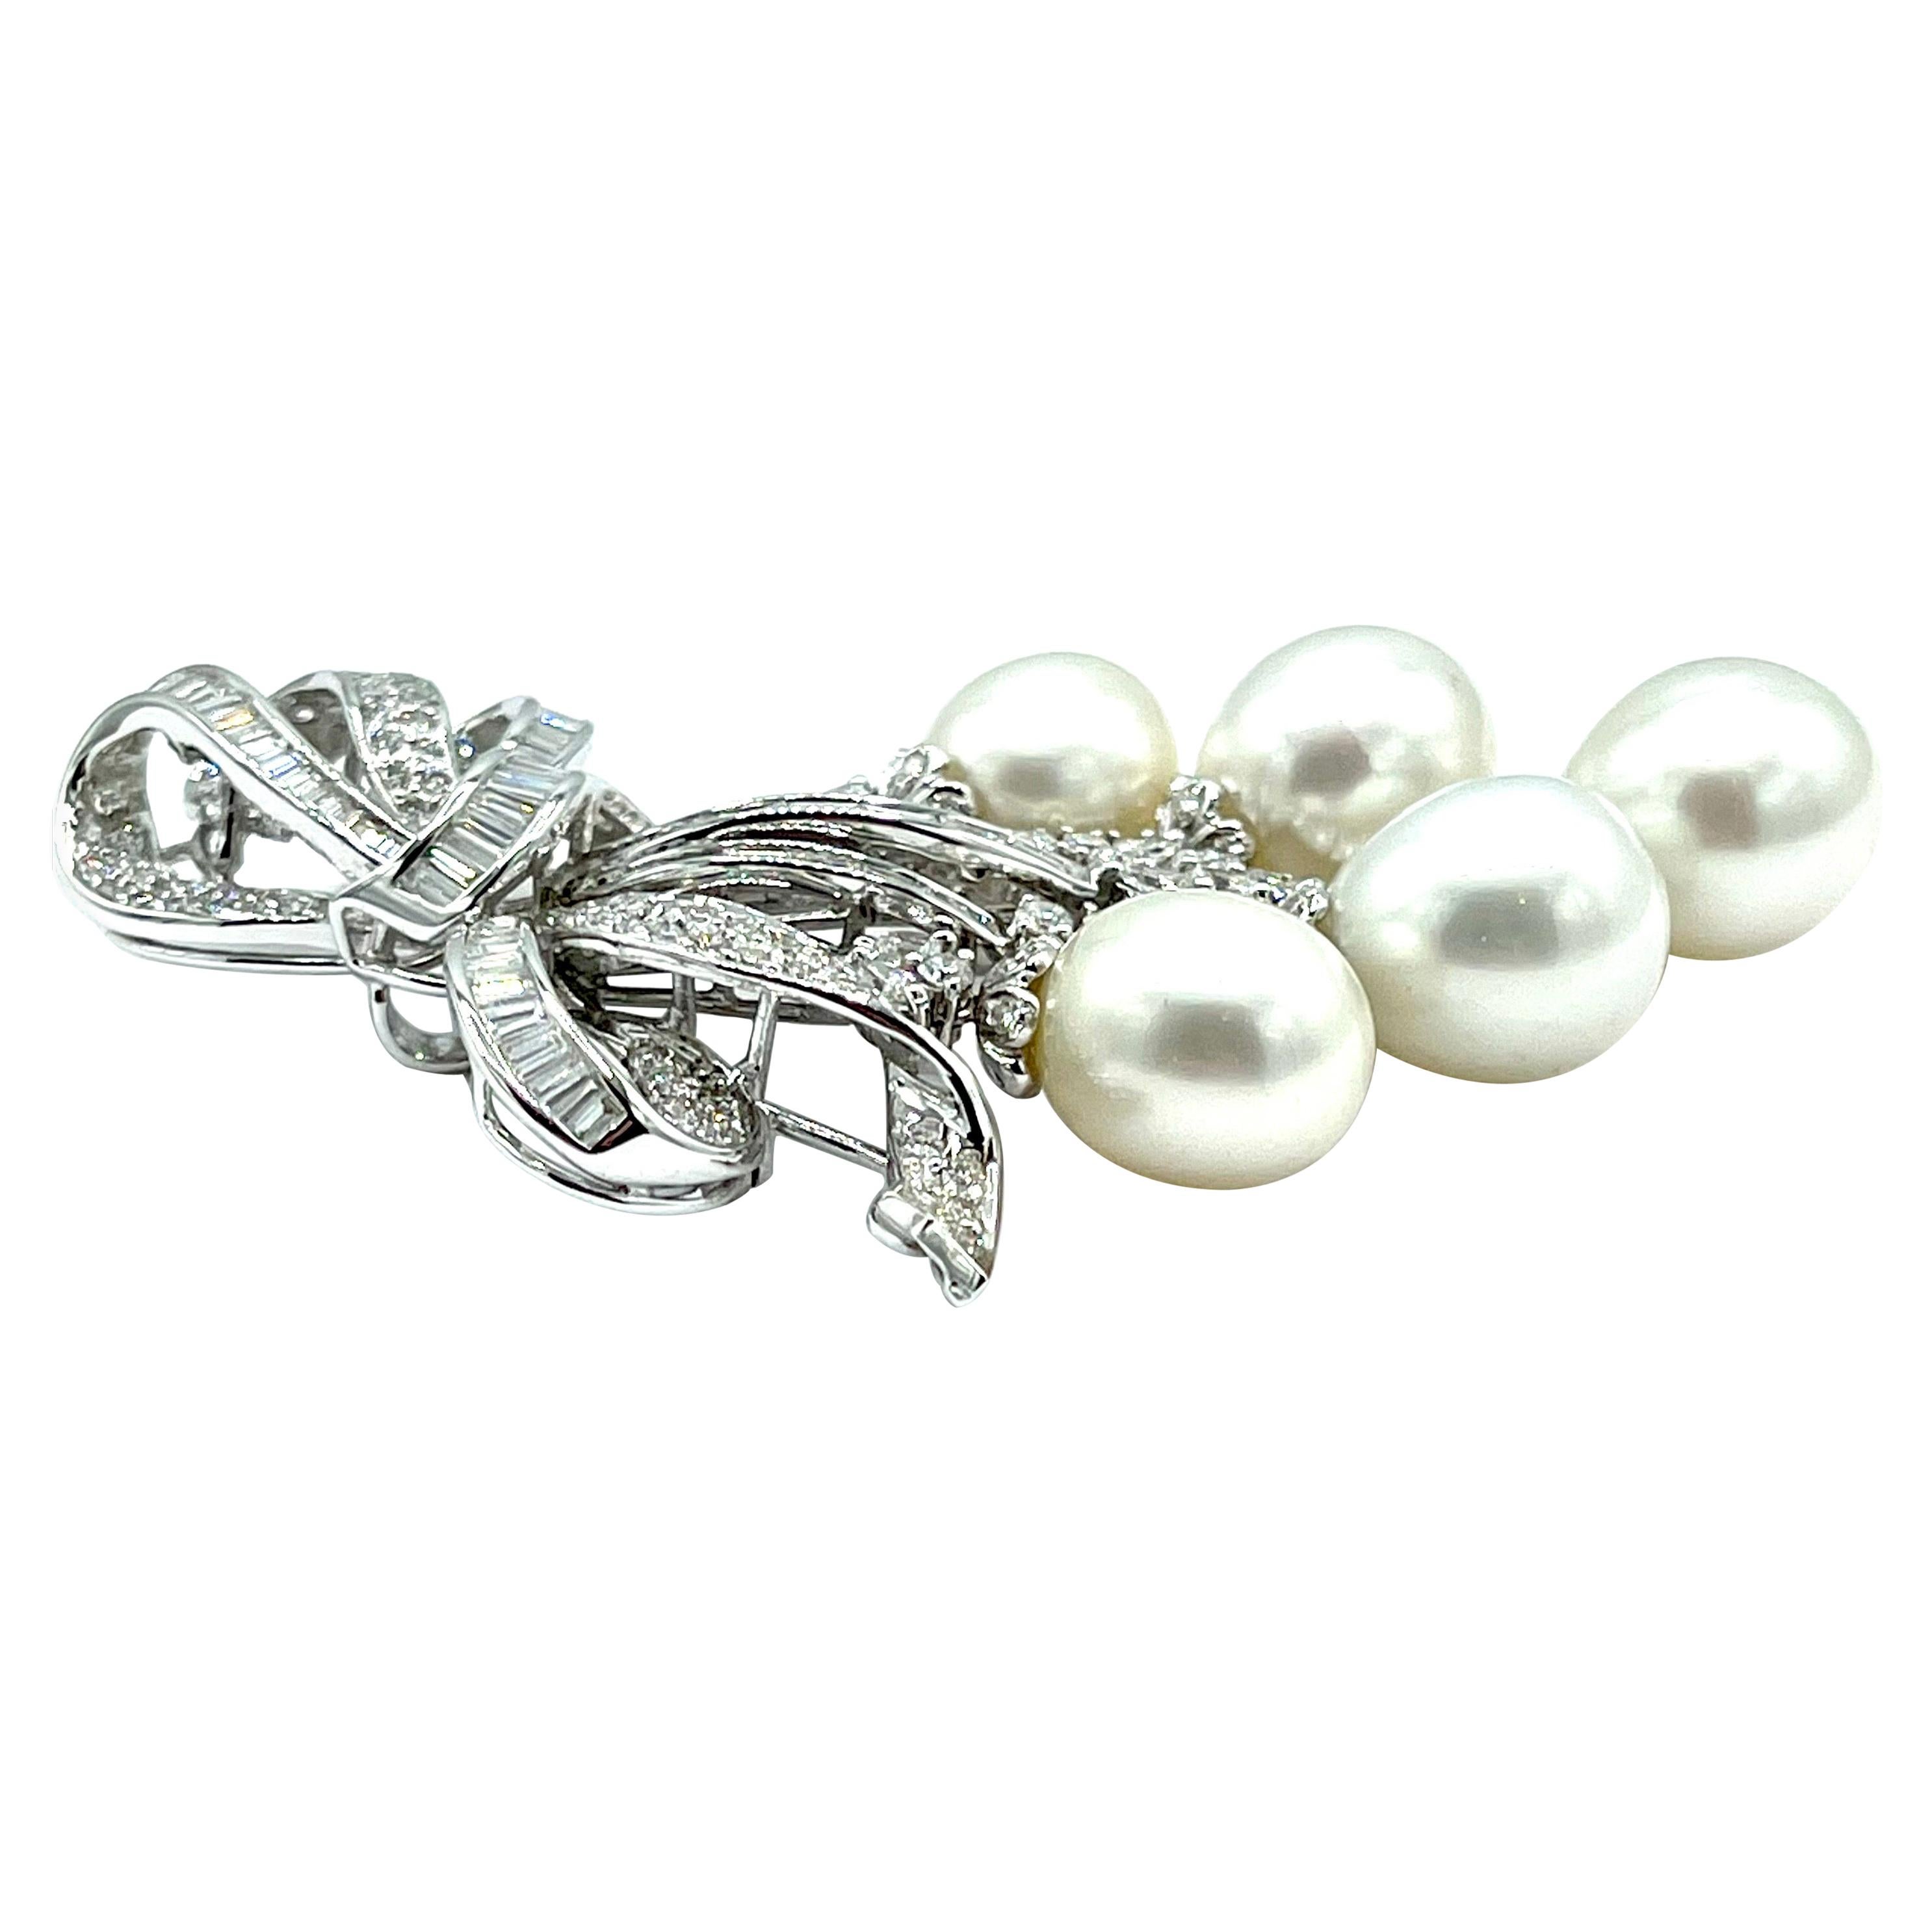 South Sea Pearl and Diamond 18k White Gold Pendant Brooch